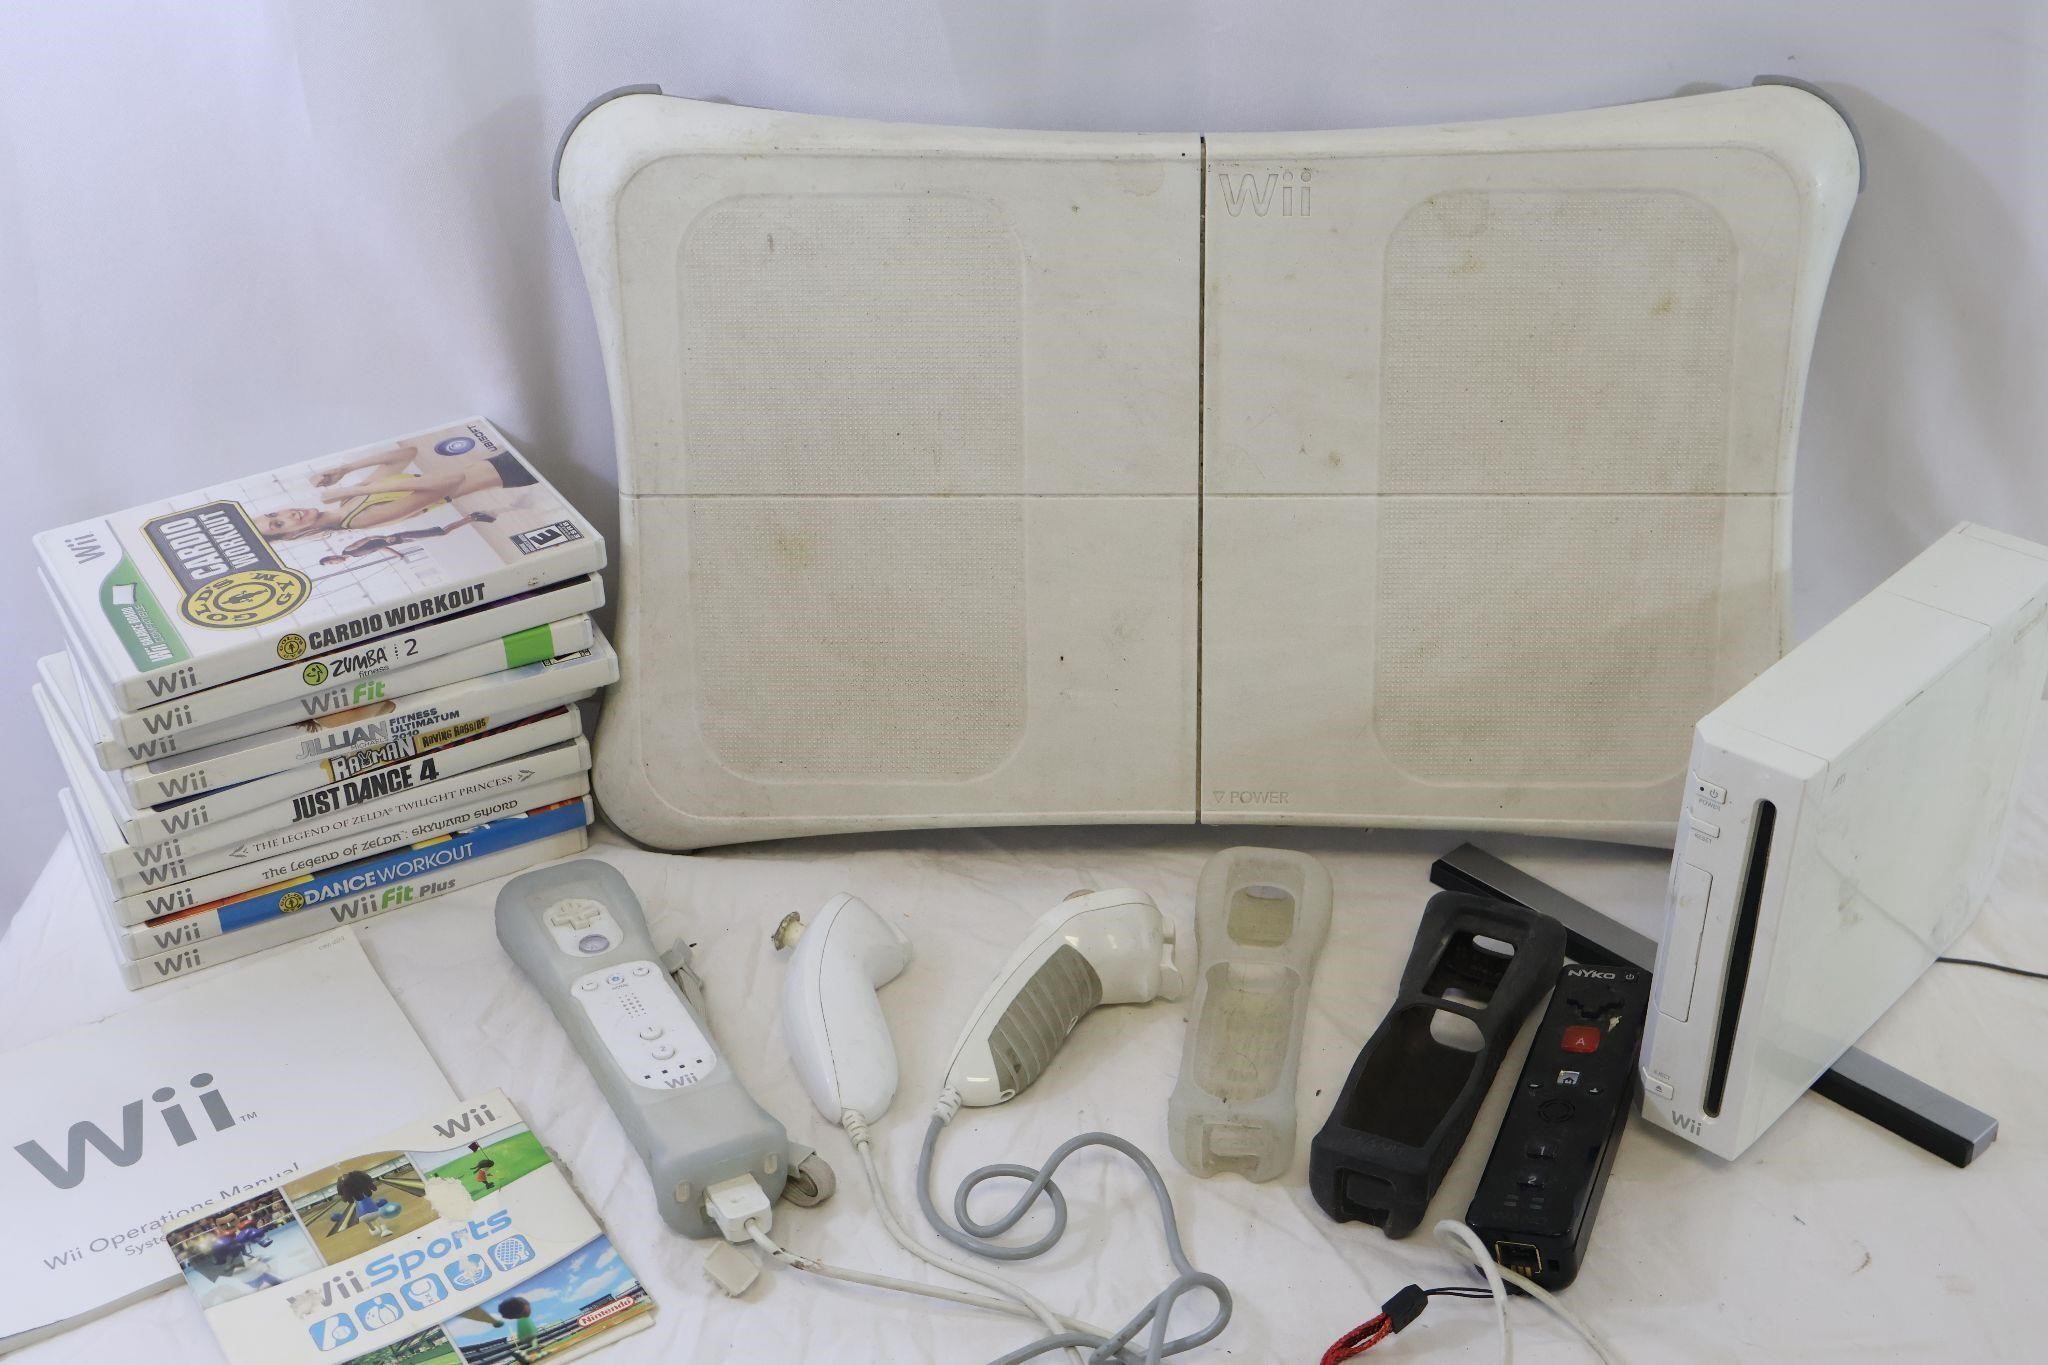 Nintendo Wii Game System, Games, Controllers++